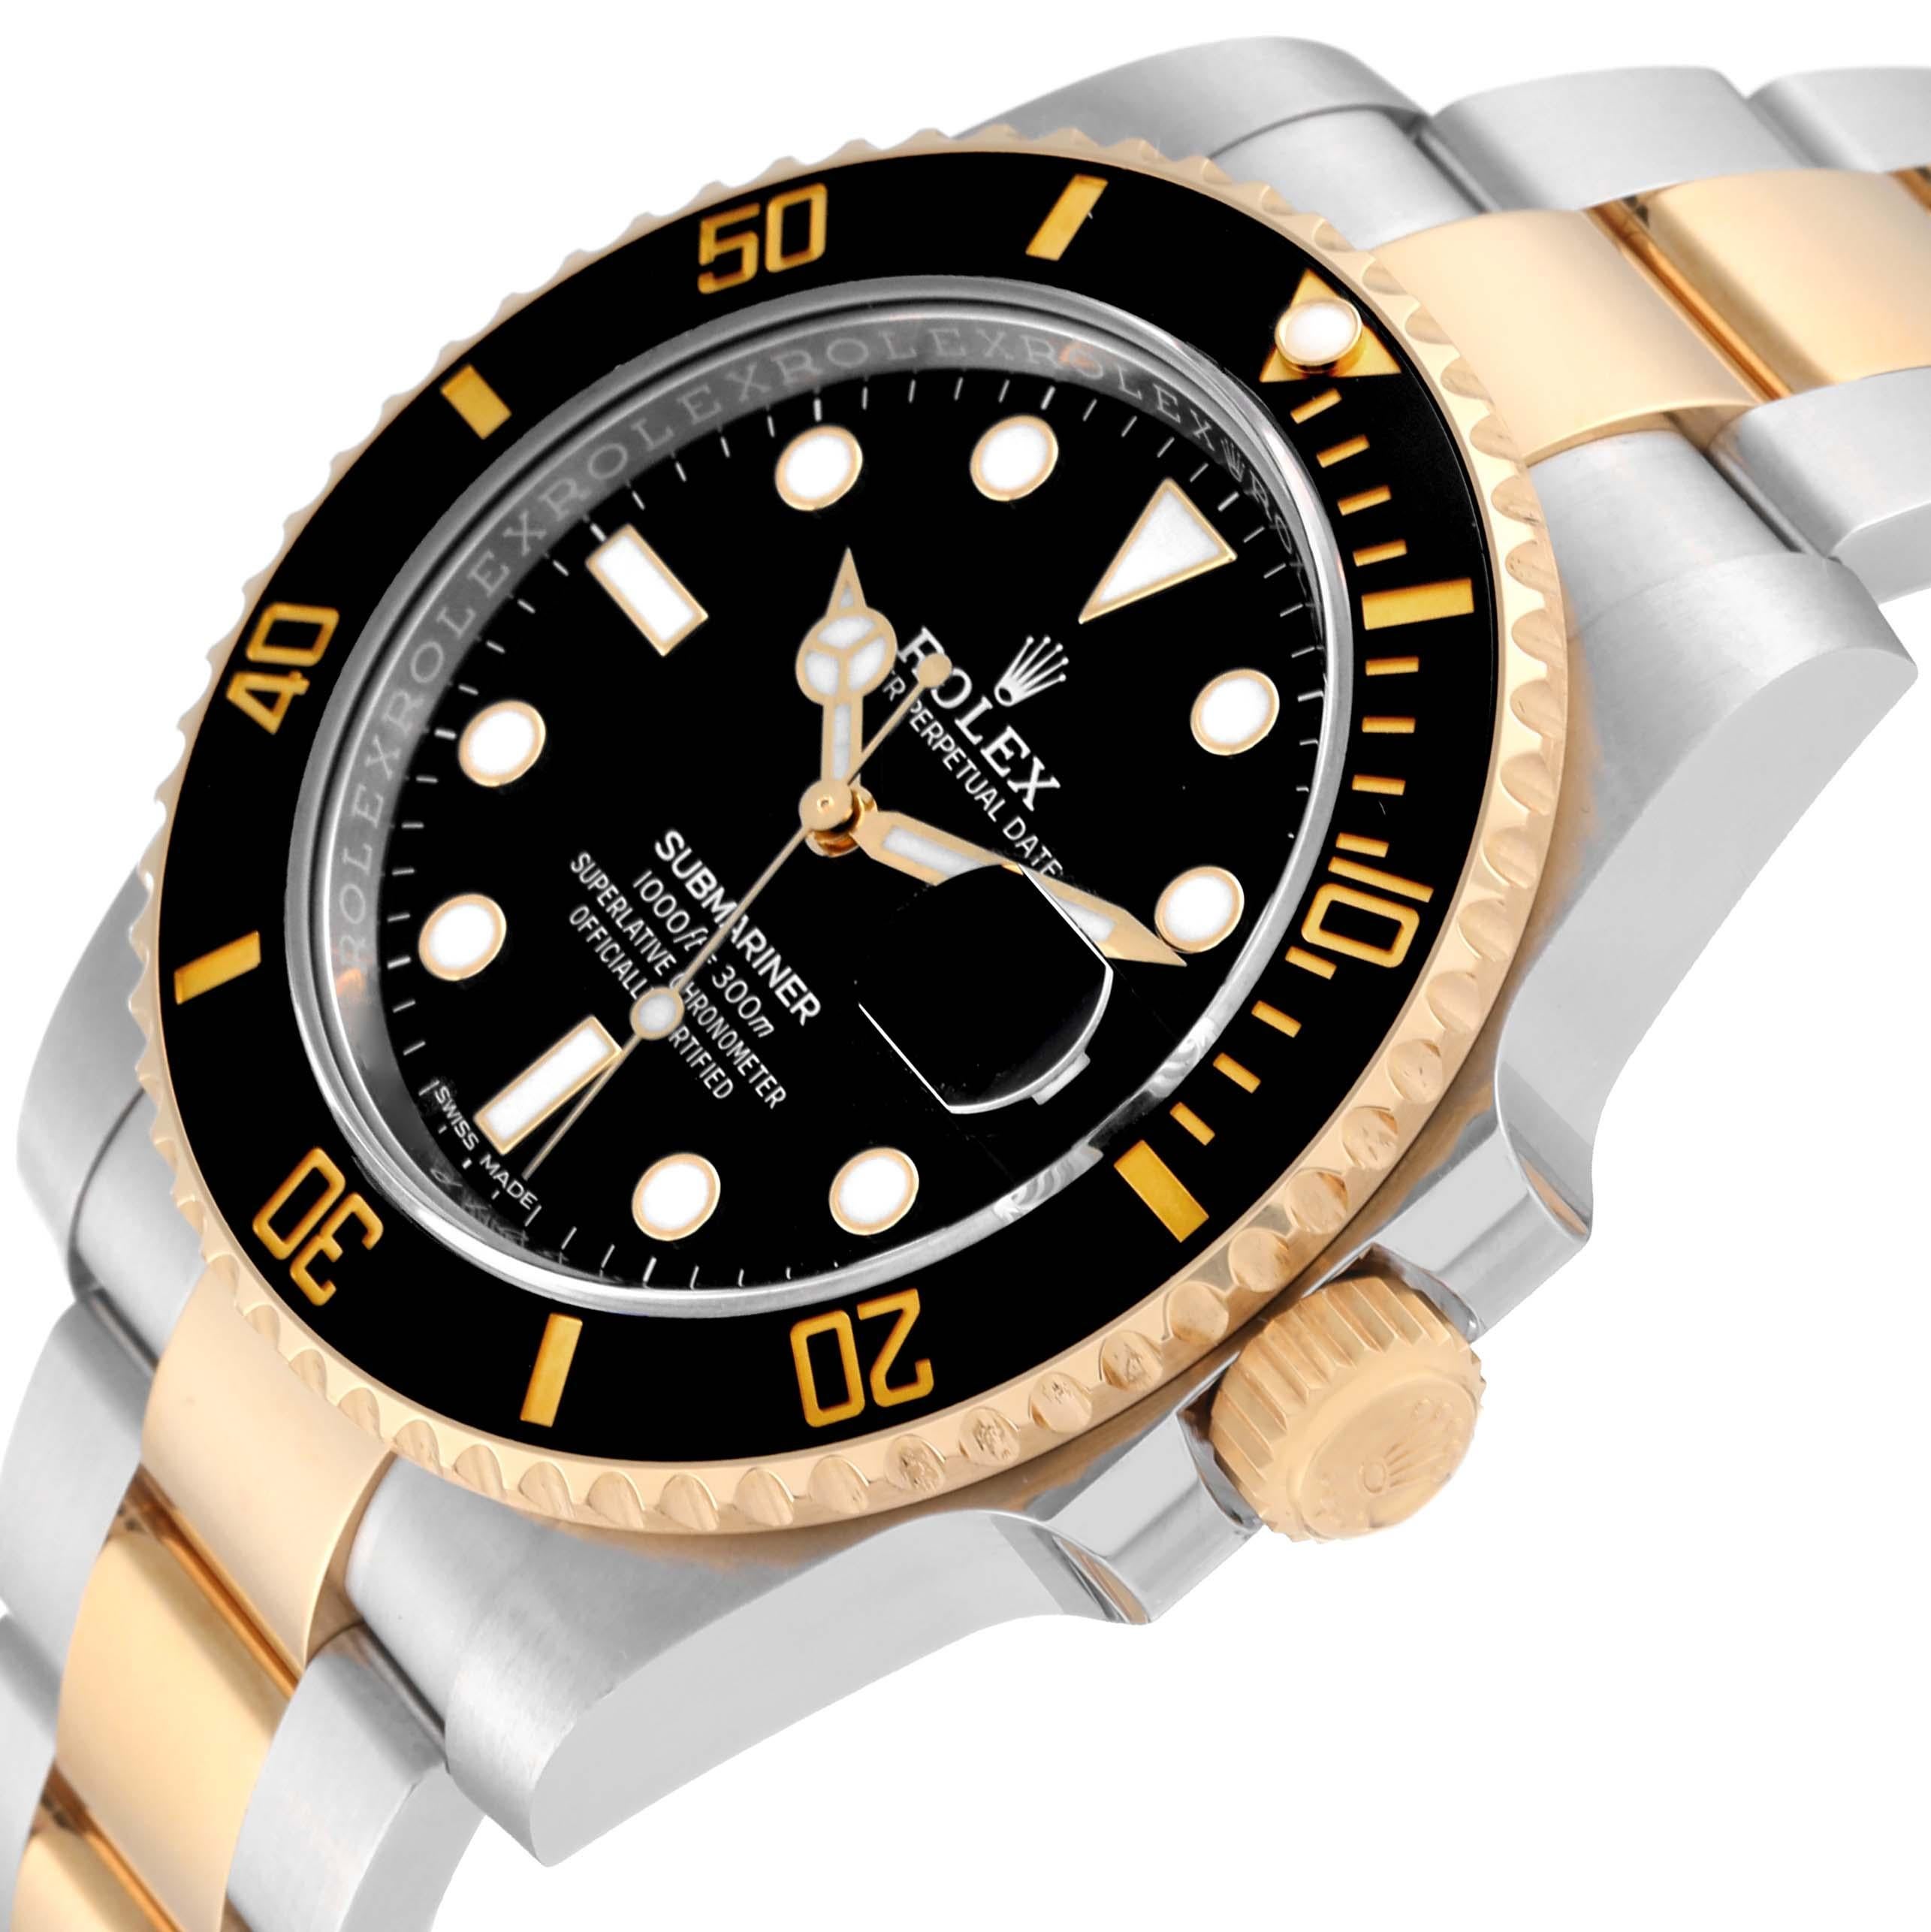 Rolex Submariner Steel Yellow Gold Black Dial Mens Watch 116613 Box Card. Officially certified chronometer automatic self-winding movement. Stainless steel and 18k yellow gold case 40.0 mm in diameter. Rolex logo on a crown. Ceramic Black Ion-plated